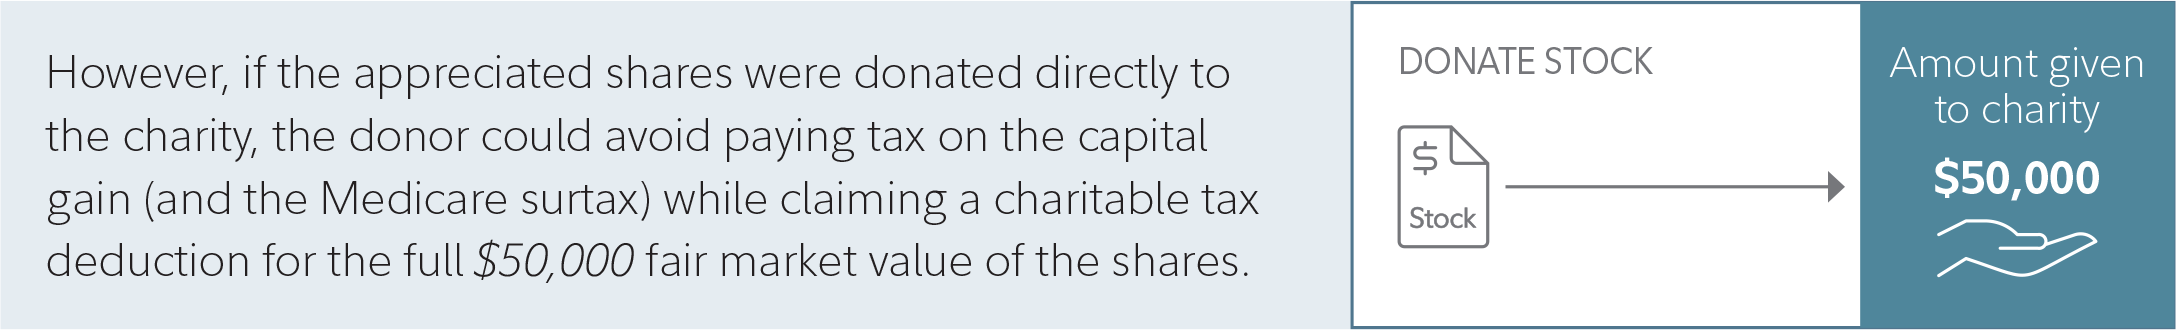 Hypothetical tax savings and increased donation if appreciated shares are donated directly to charity.